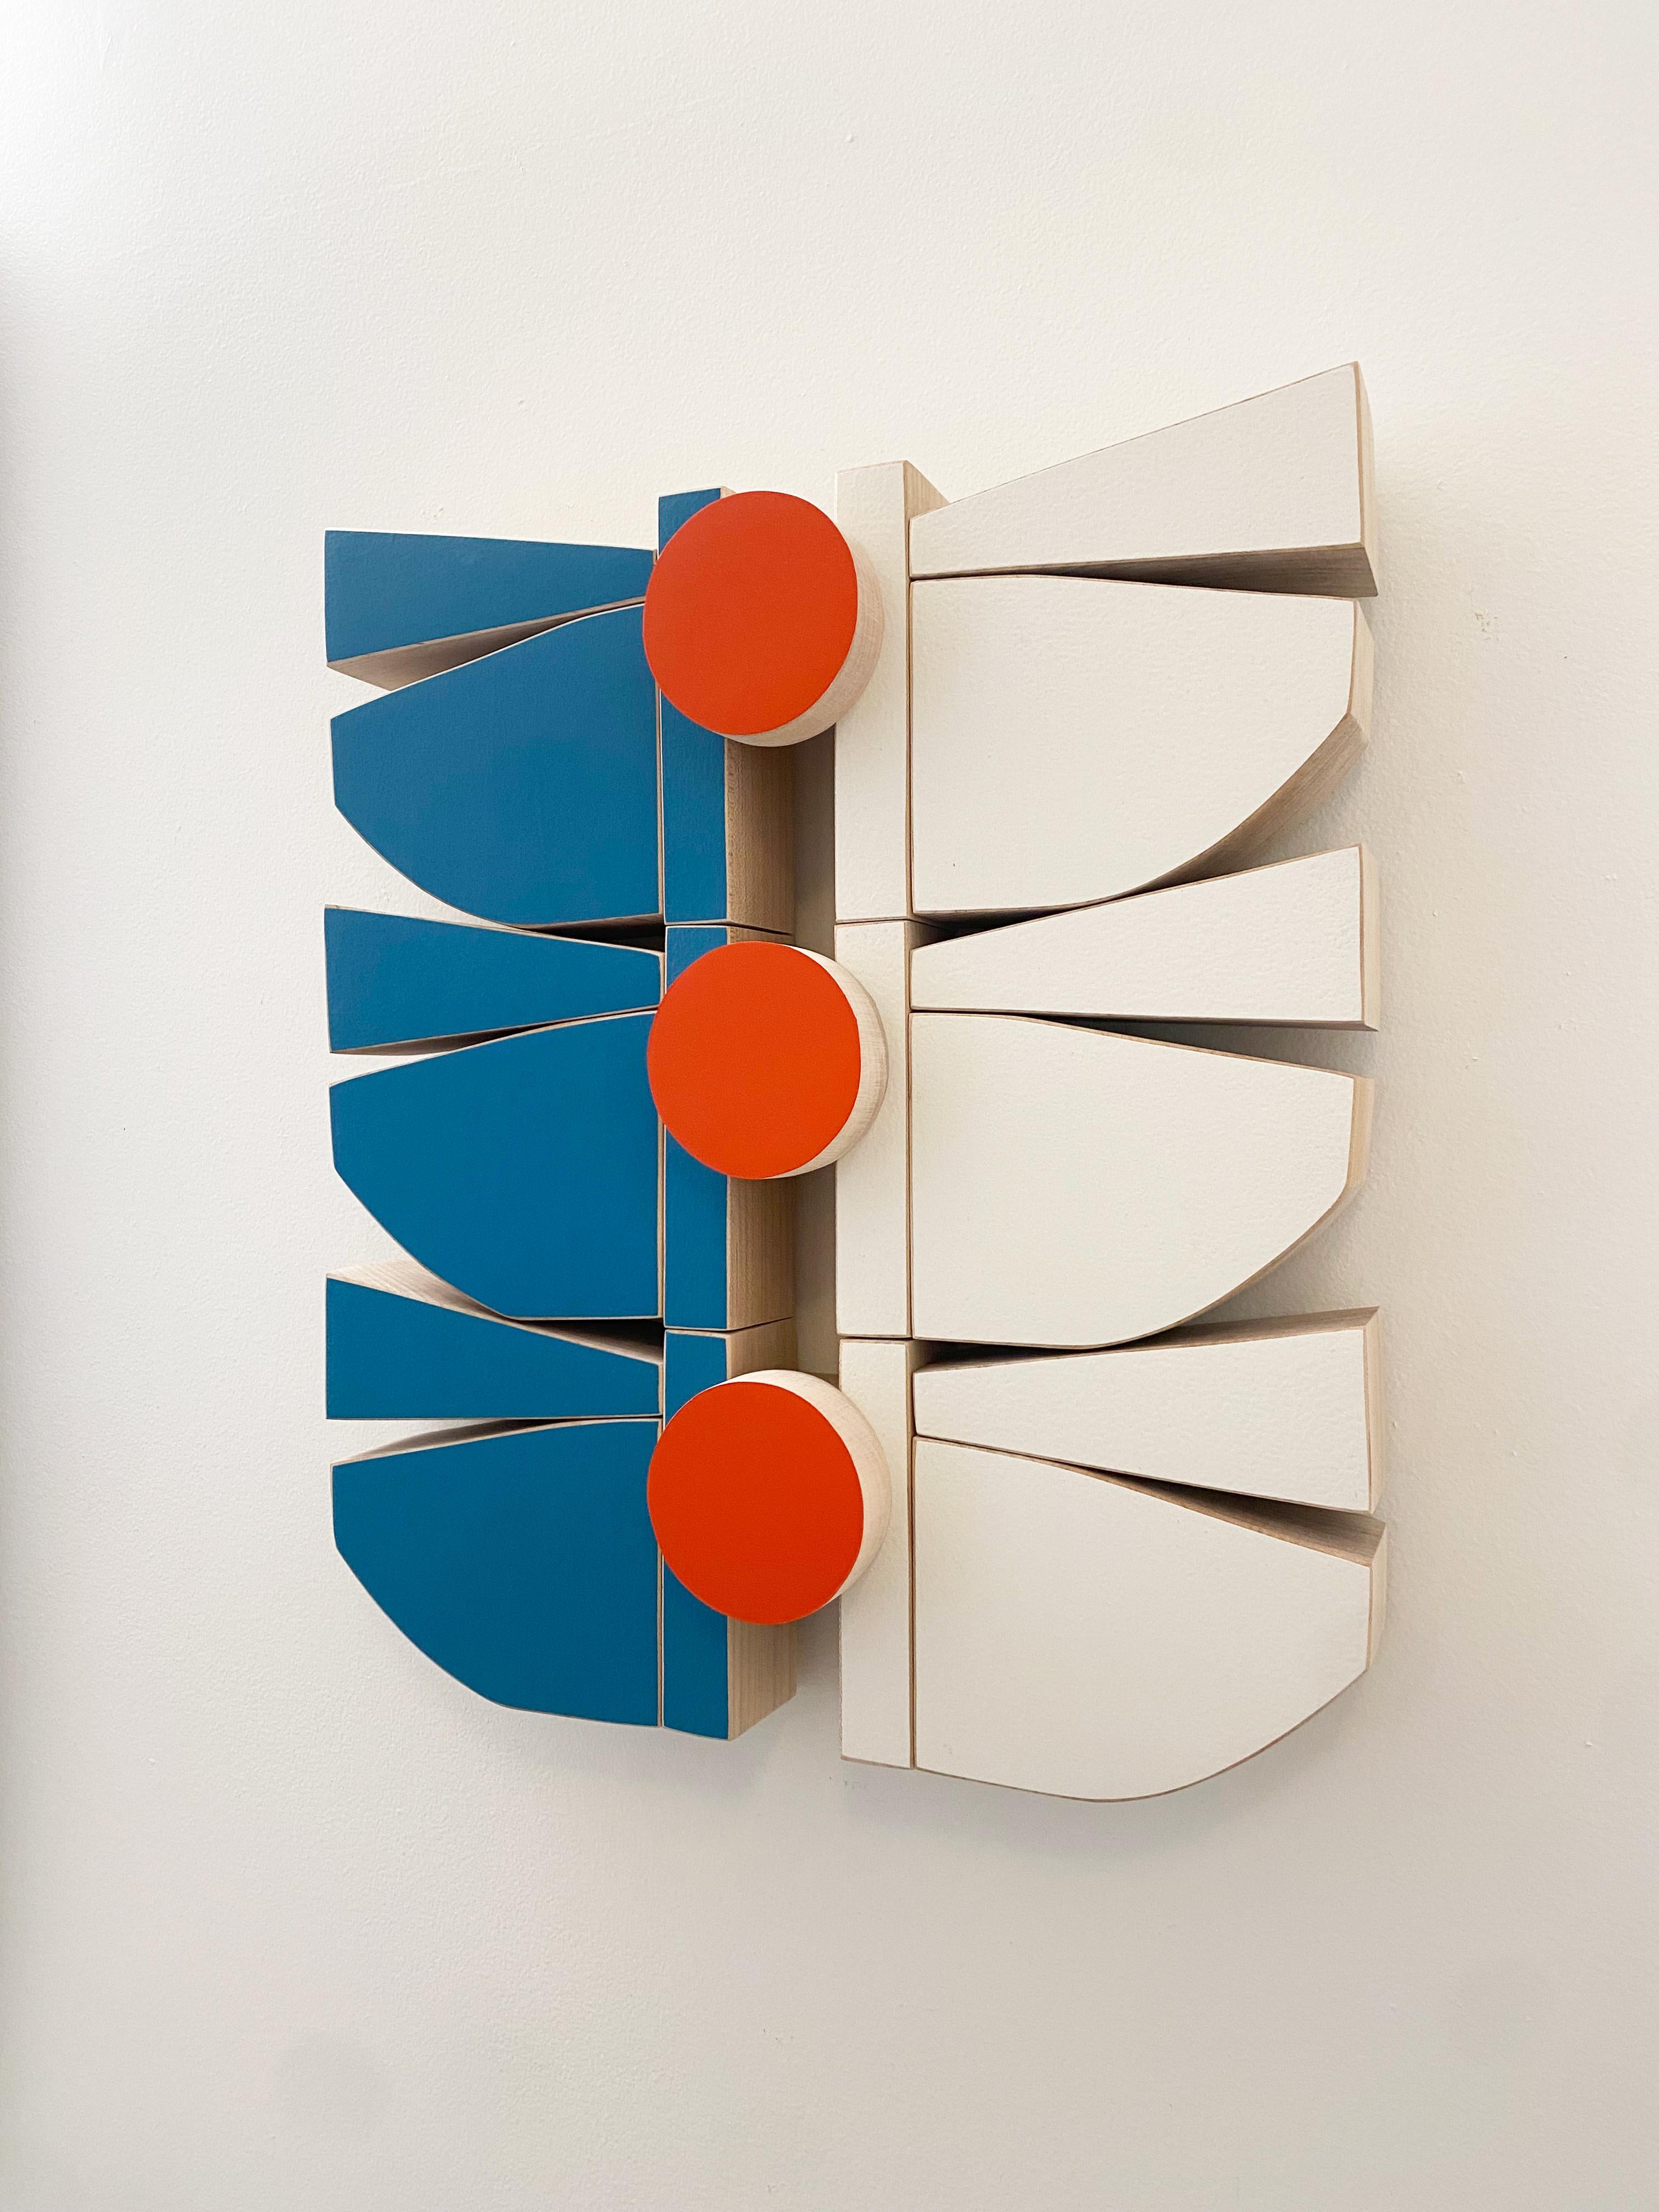 Artwork made with acrylic on solid maple and matte clear coat

Small Pop series are minimalist driven, wood wall sculptures that are small and blocky and feature bright saturated colors. The pieces was inspired by my love for simple bold colors and